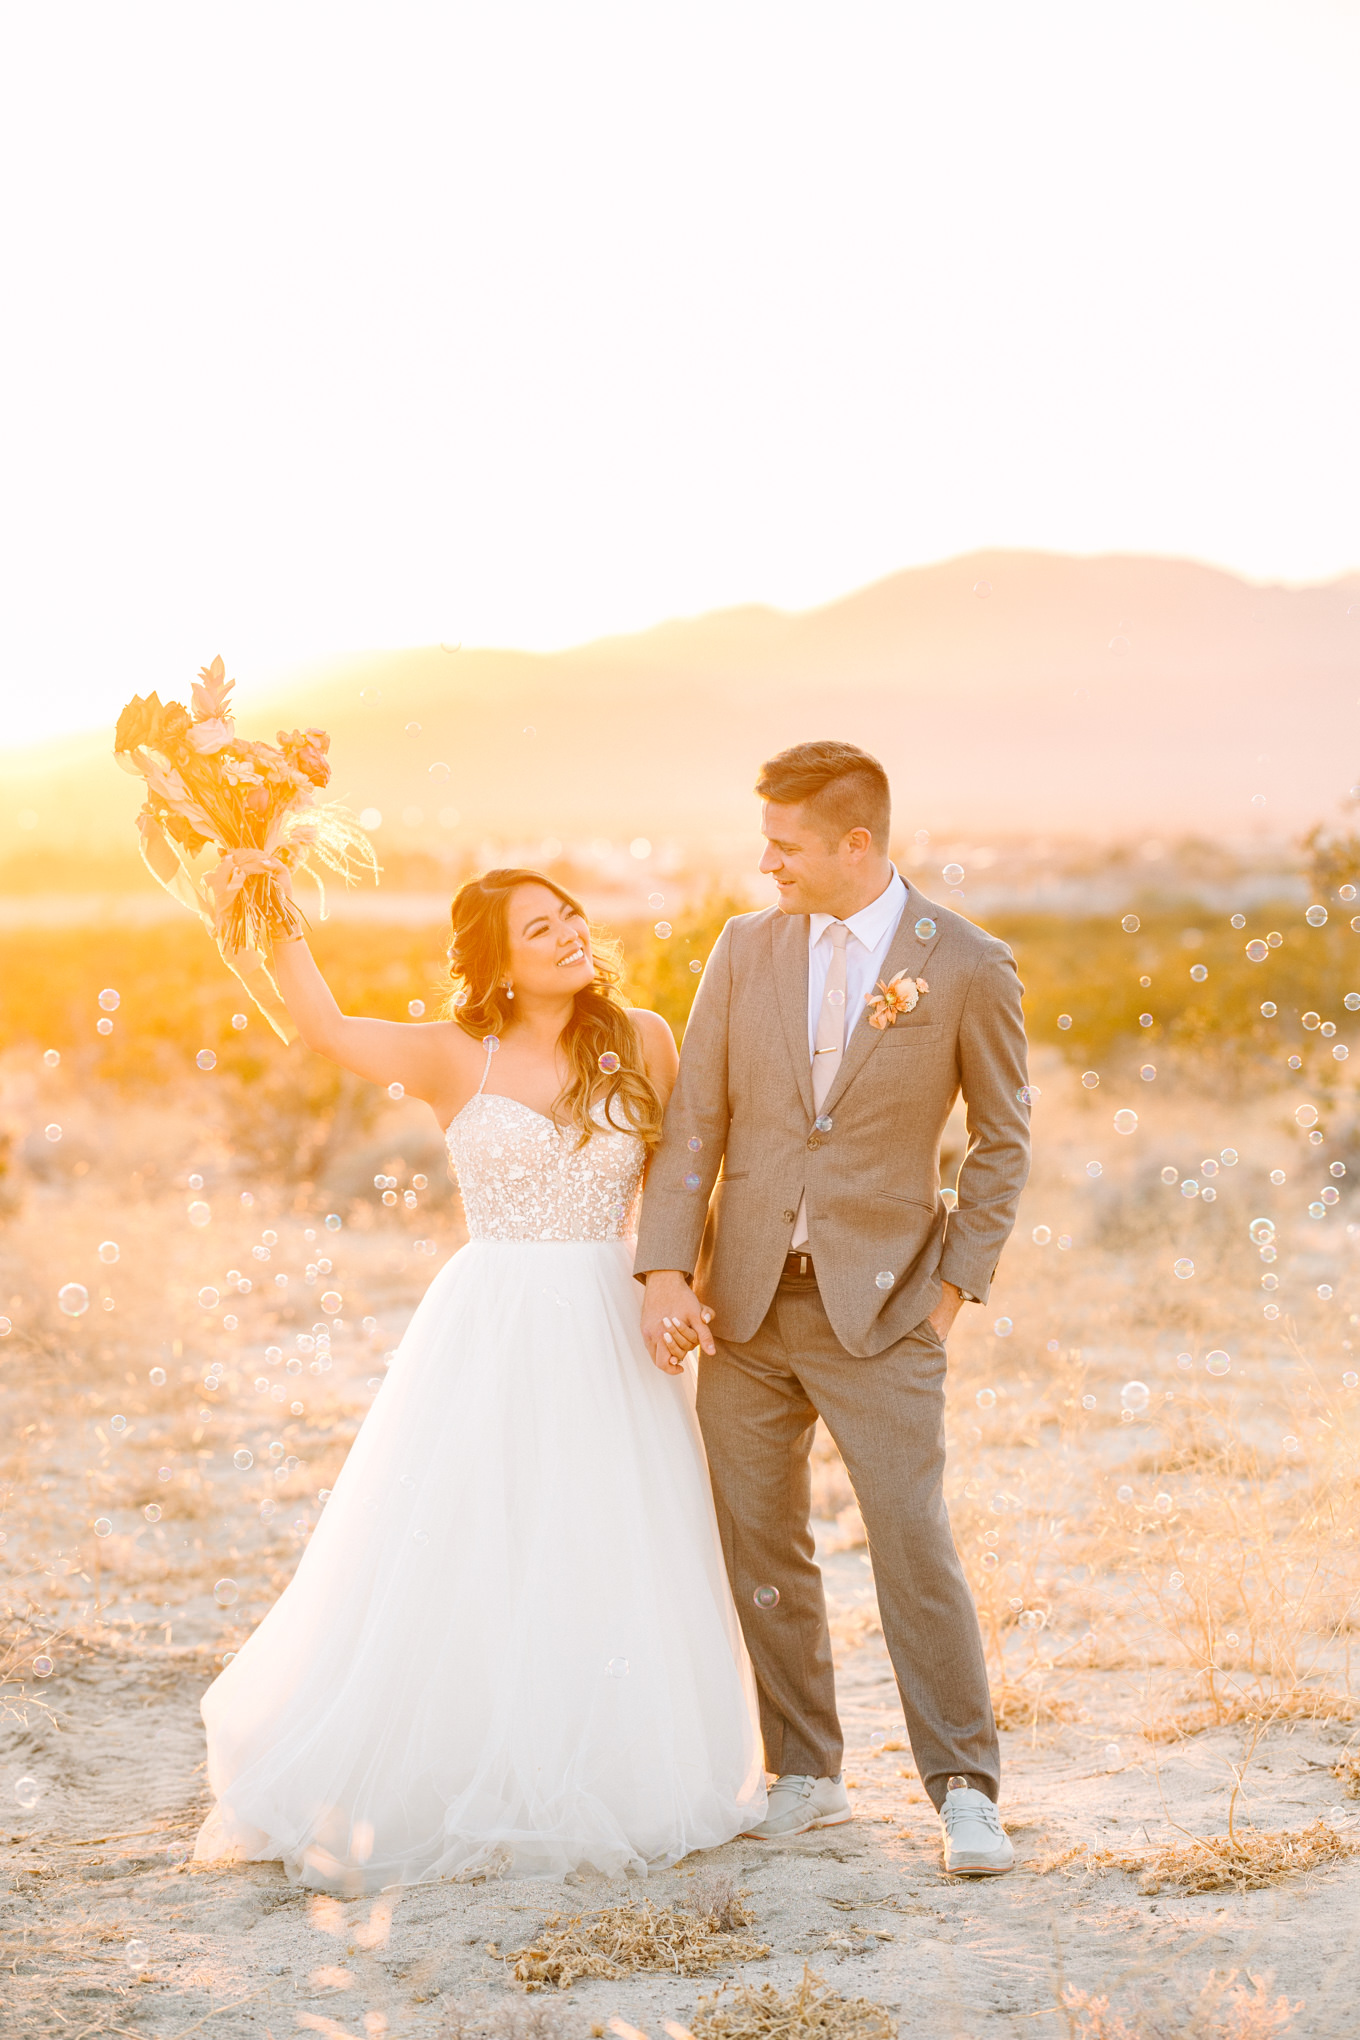 Bride and groom at sunset surrounded by bubbles | Pink and orange Lautner Compound wedding | Colorful Palm Springs wedding photography | #palmspringsphotographer #palmspringswedding #lautnercompound #southerncaliforniawedding  Source: Mary Costa Photography | Los Angeles